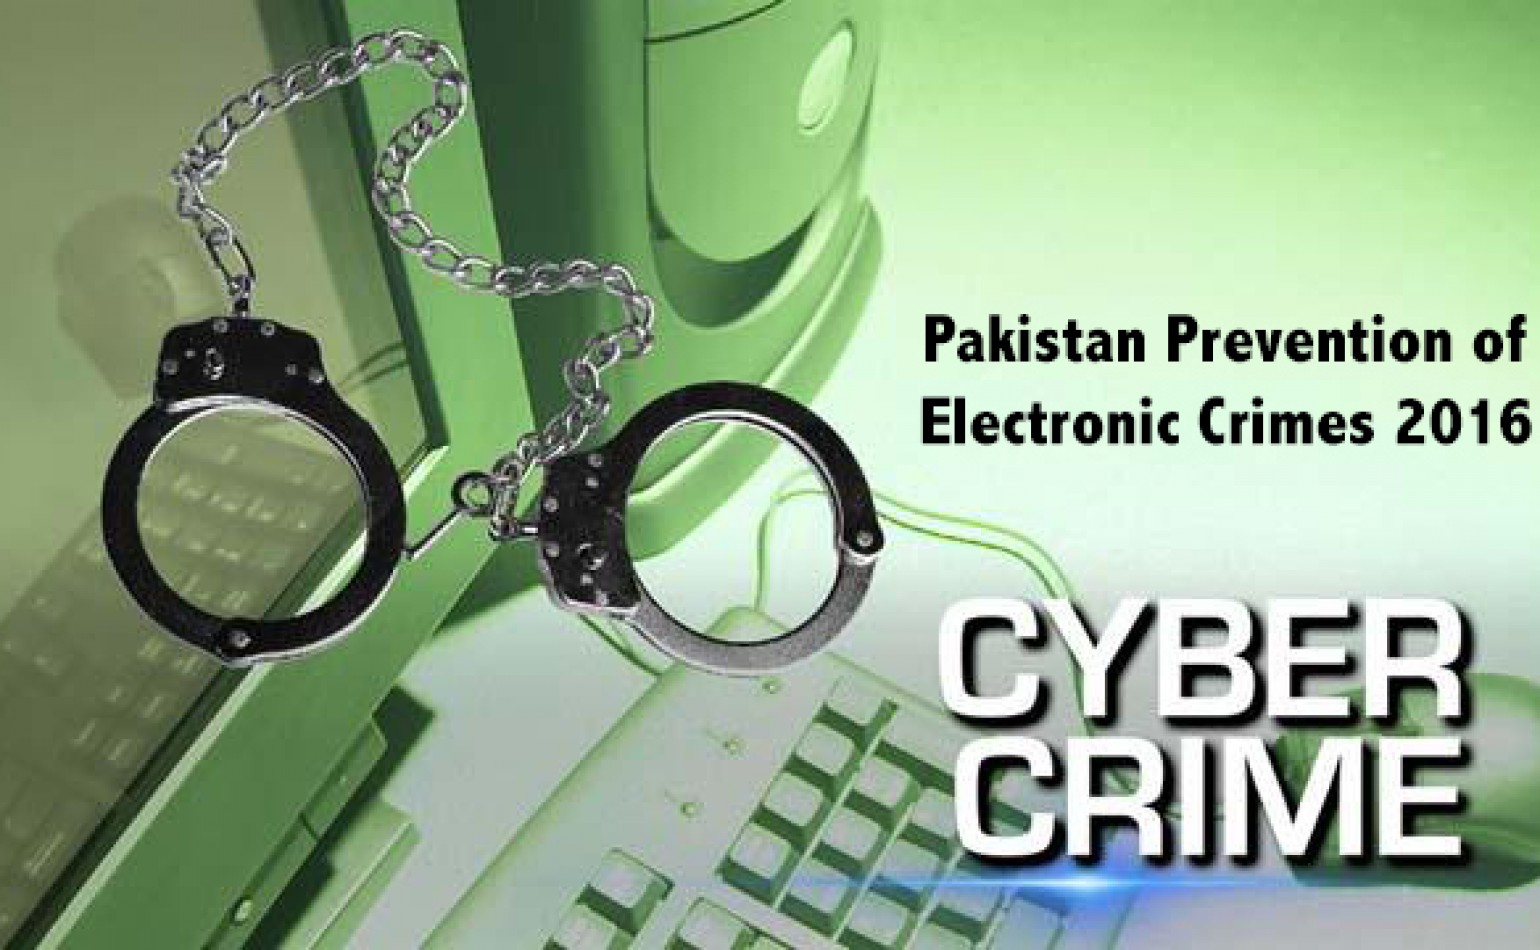 National Assembly passes the much resisted Prevention of Electronic Crimes Bill 2016